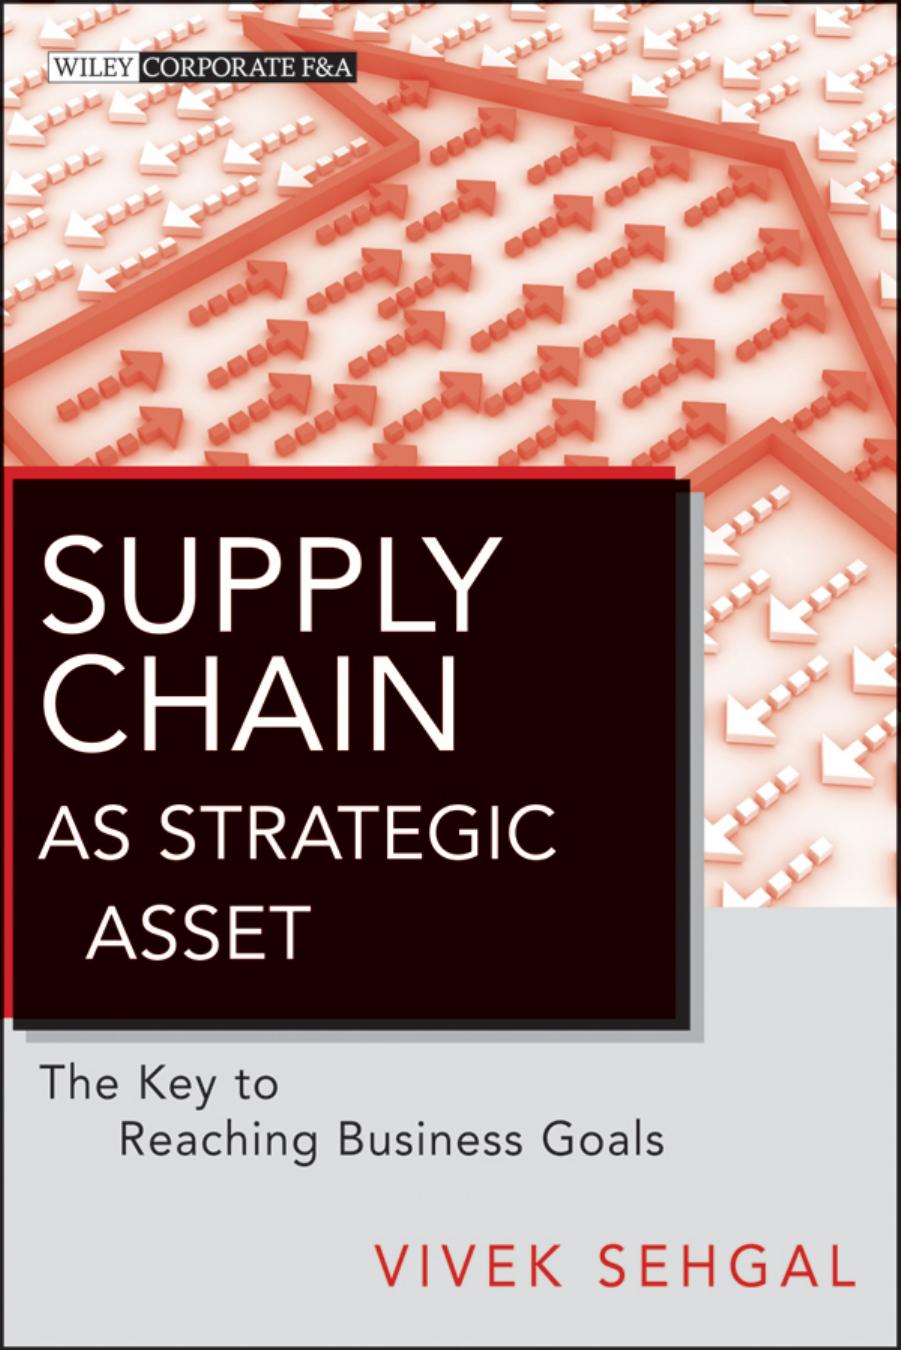 Supply Chain as Strategic Asset: The Key to Reaching Business Goals